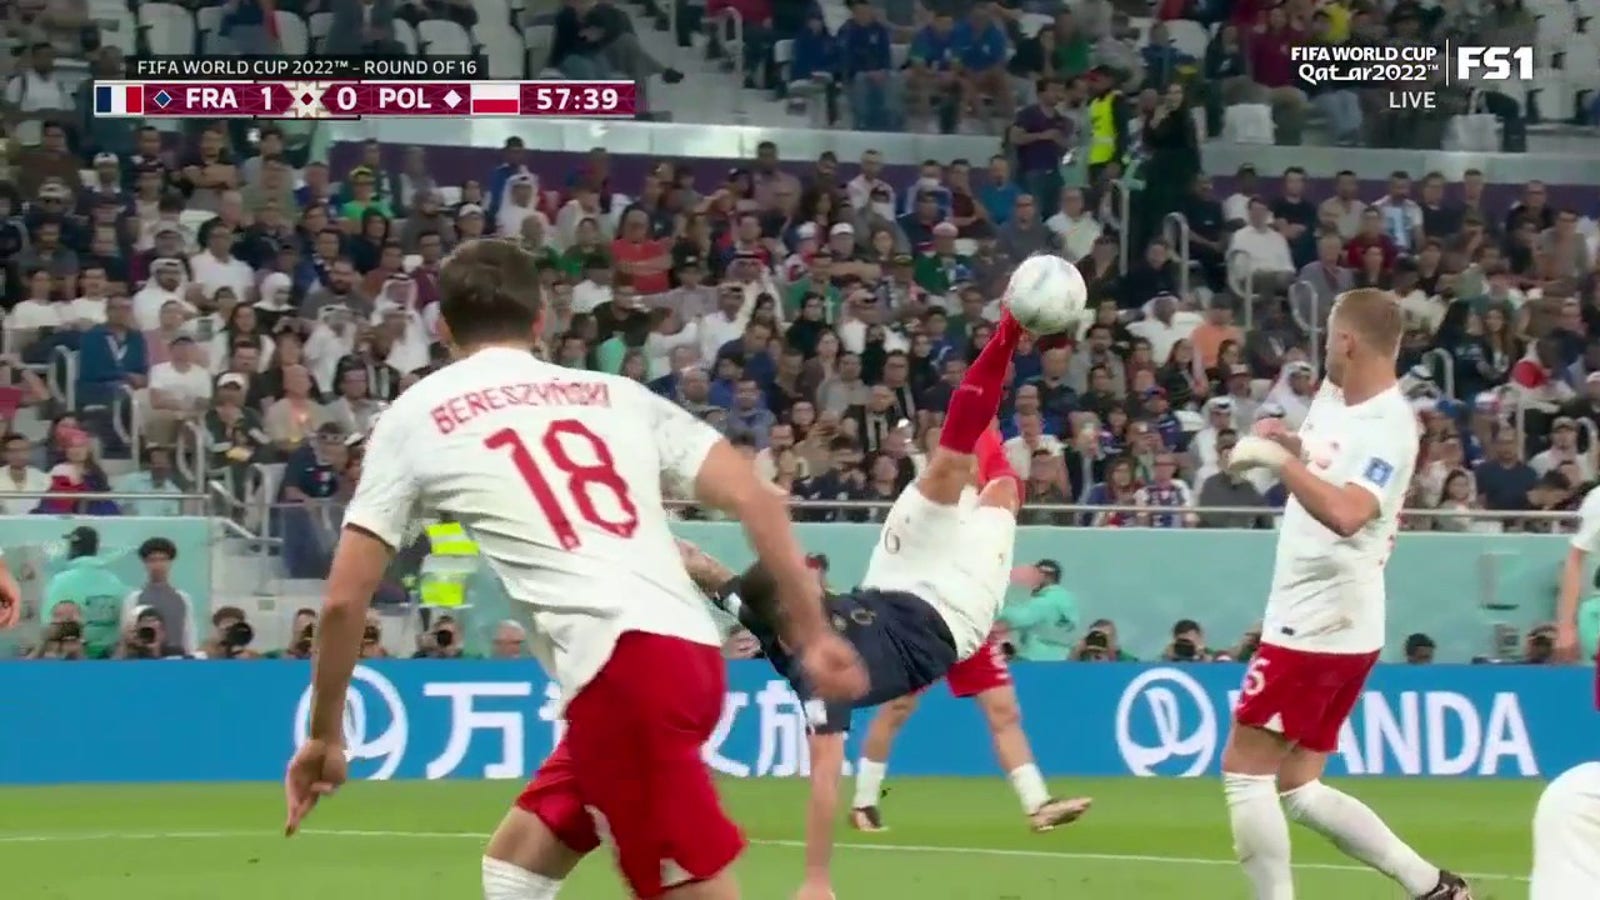 France's Olivier Giroud unleashes a bicycle kick after a foul whistle 